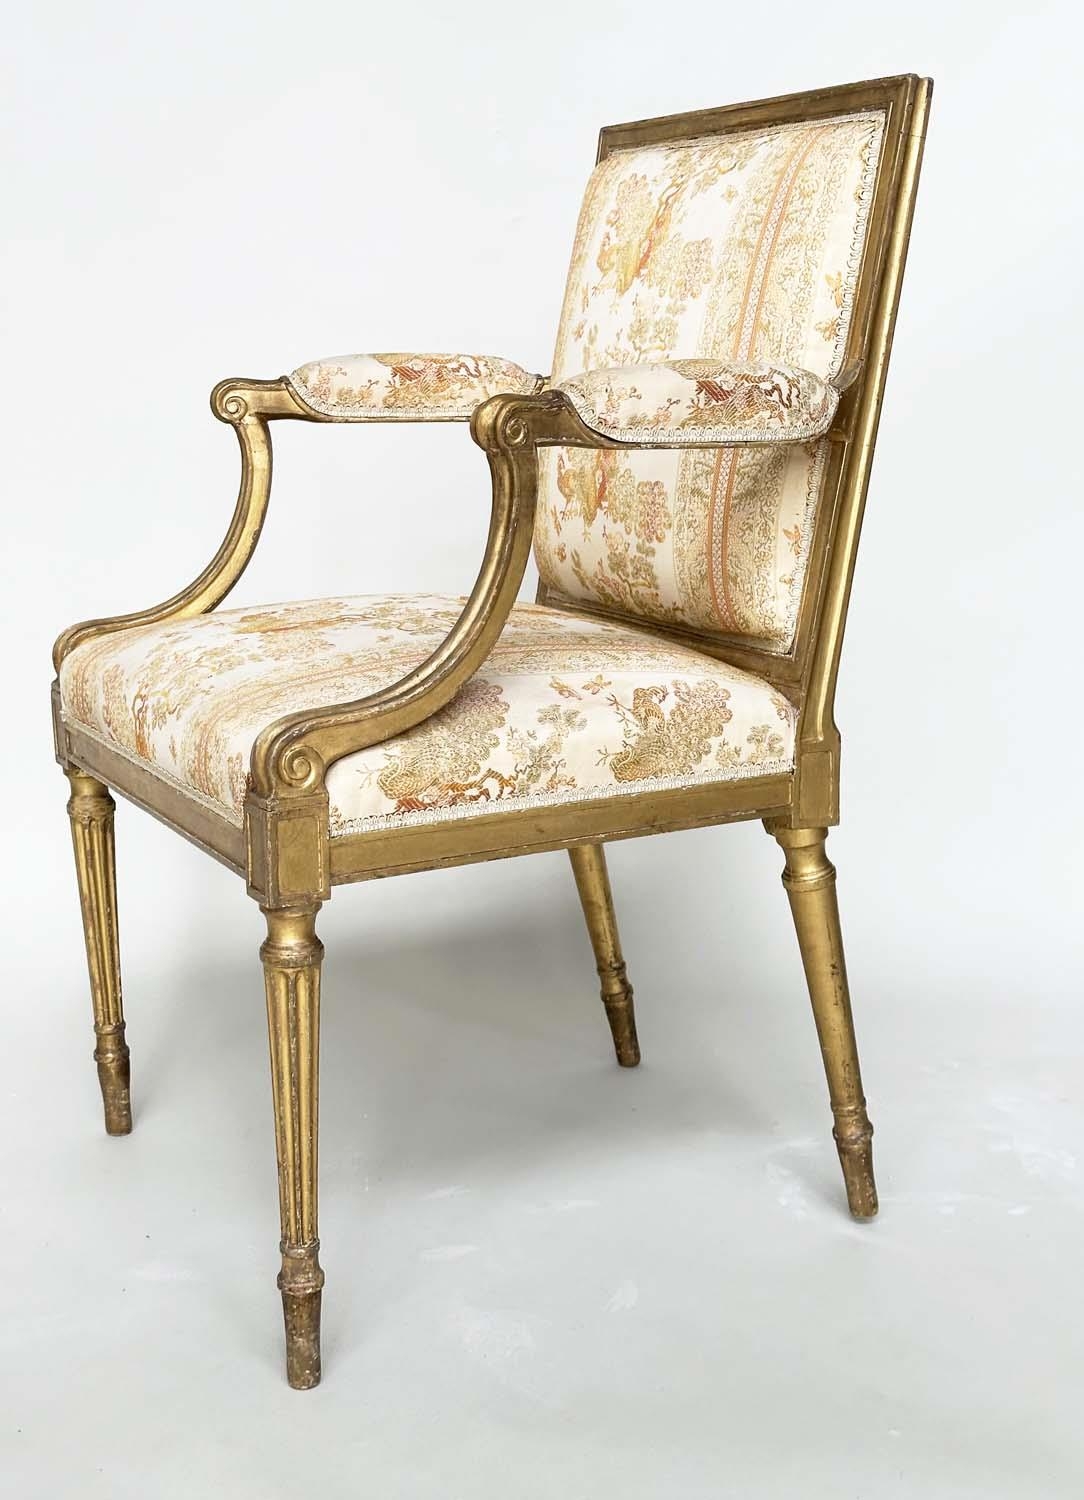 FAUTEUILS, a pair, 19th century giltwood each with down swept arms and carved fluted supports, - Image 10 of 11